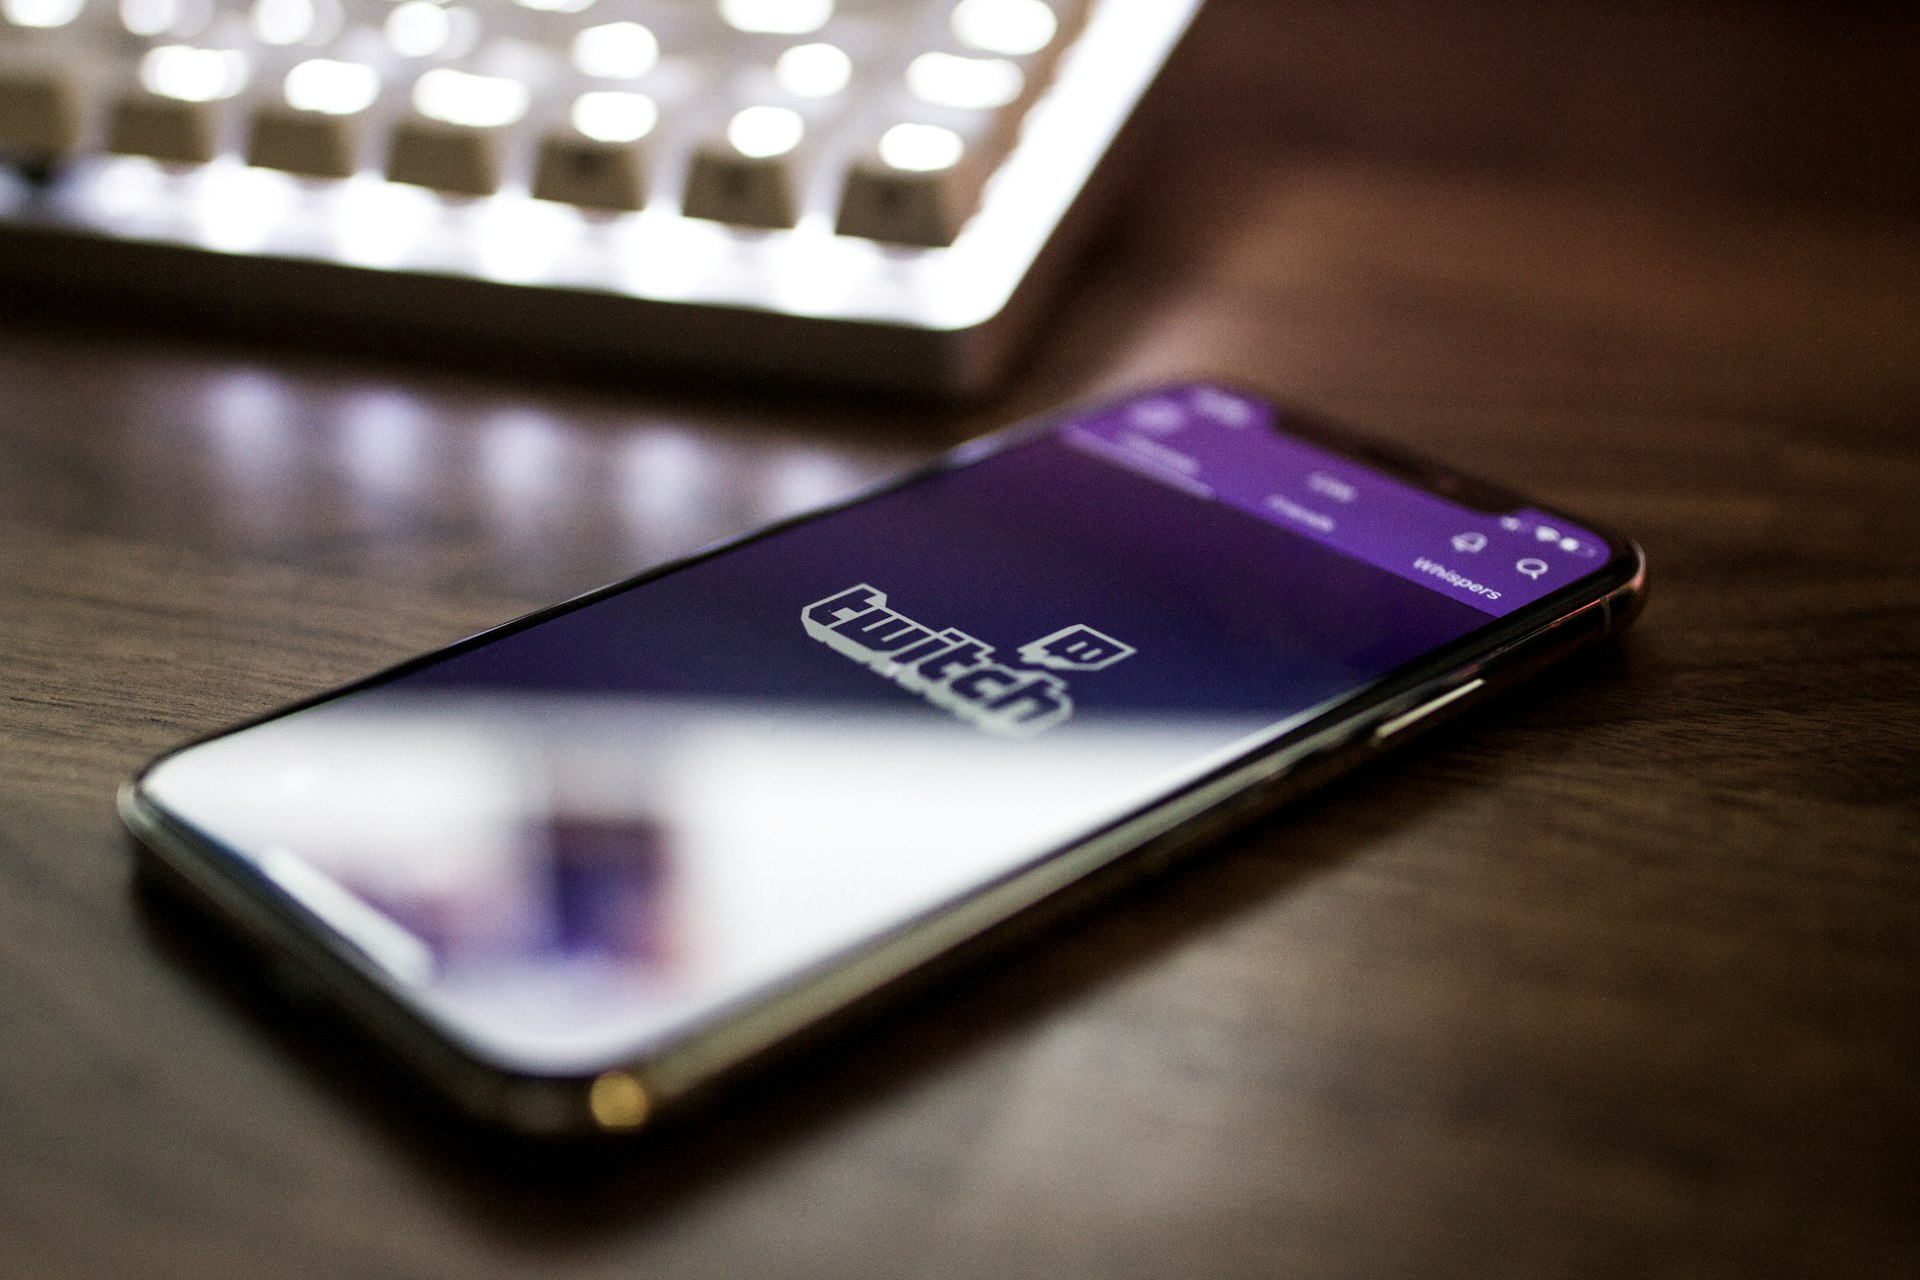 Twitch has introduced Stories and a feed to discover new streamers to watch.